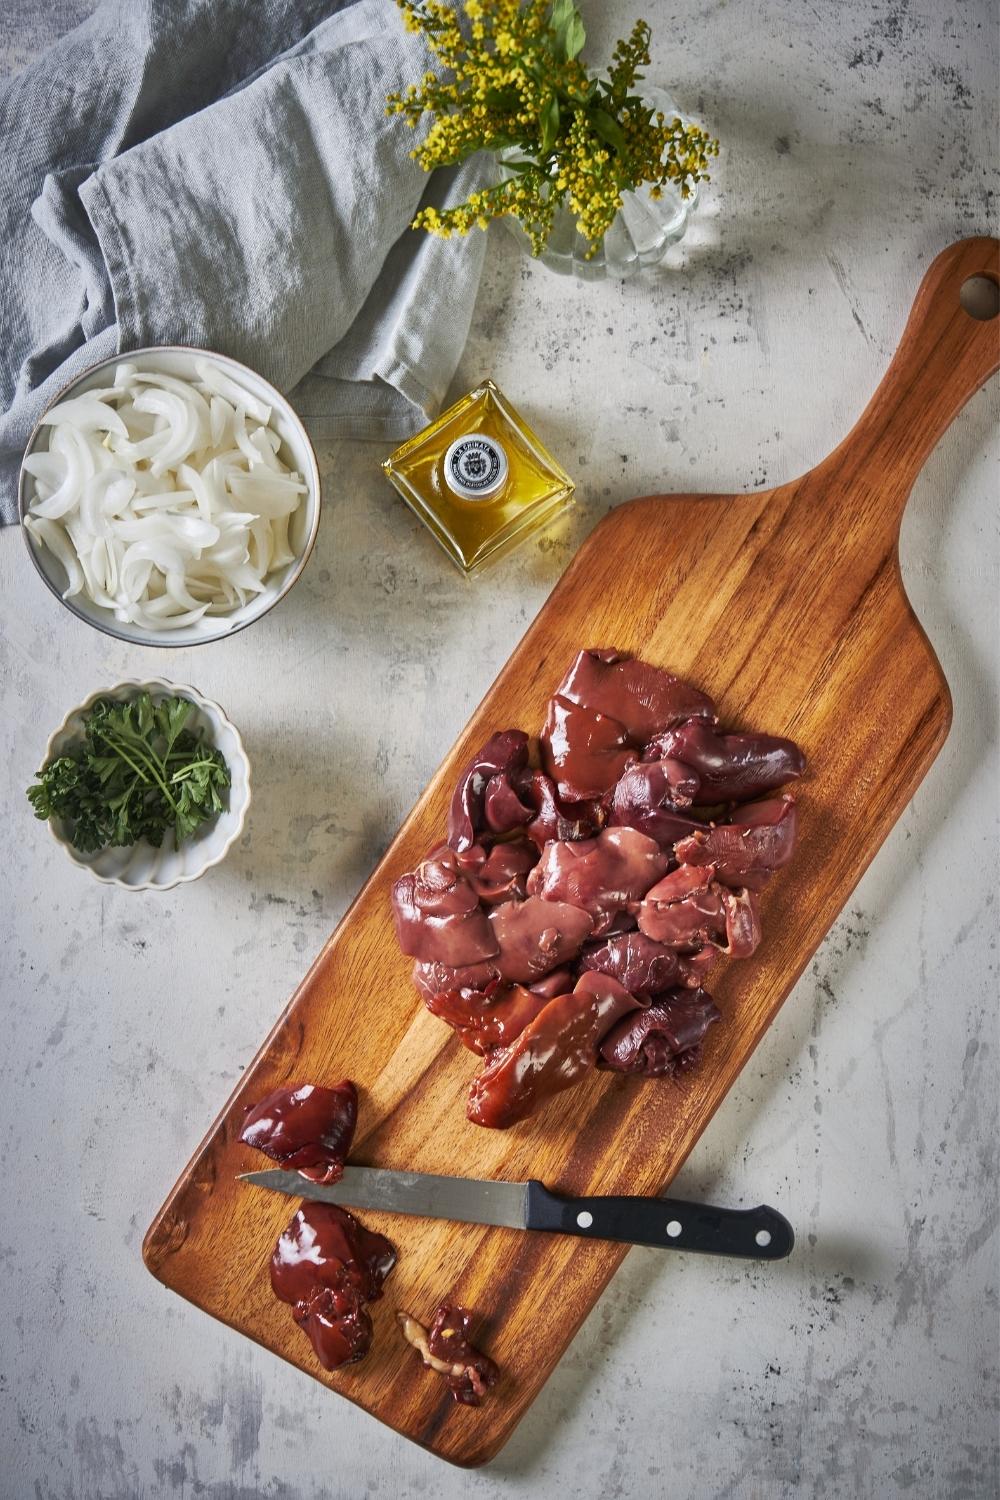 Raw chicken livers on a wooden cutting board. On one side of the board are the sliced chicken livers and on the other side are the remaining whole chicken livers. A small knife is on the cutting board and a bottle of olive oil, bowl of raw sliced onions, and bowl of parsley are to the side.